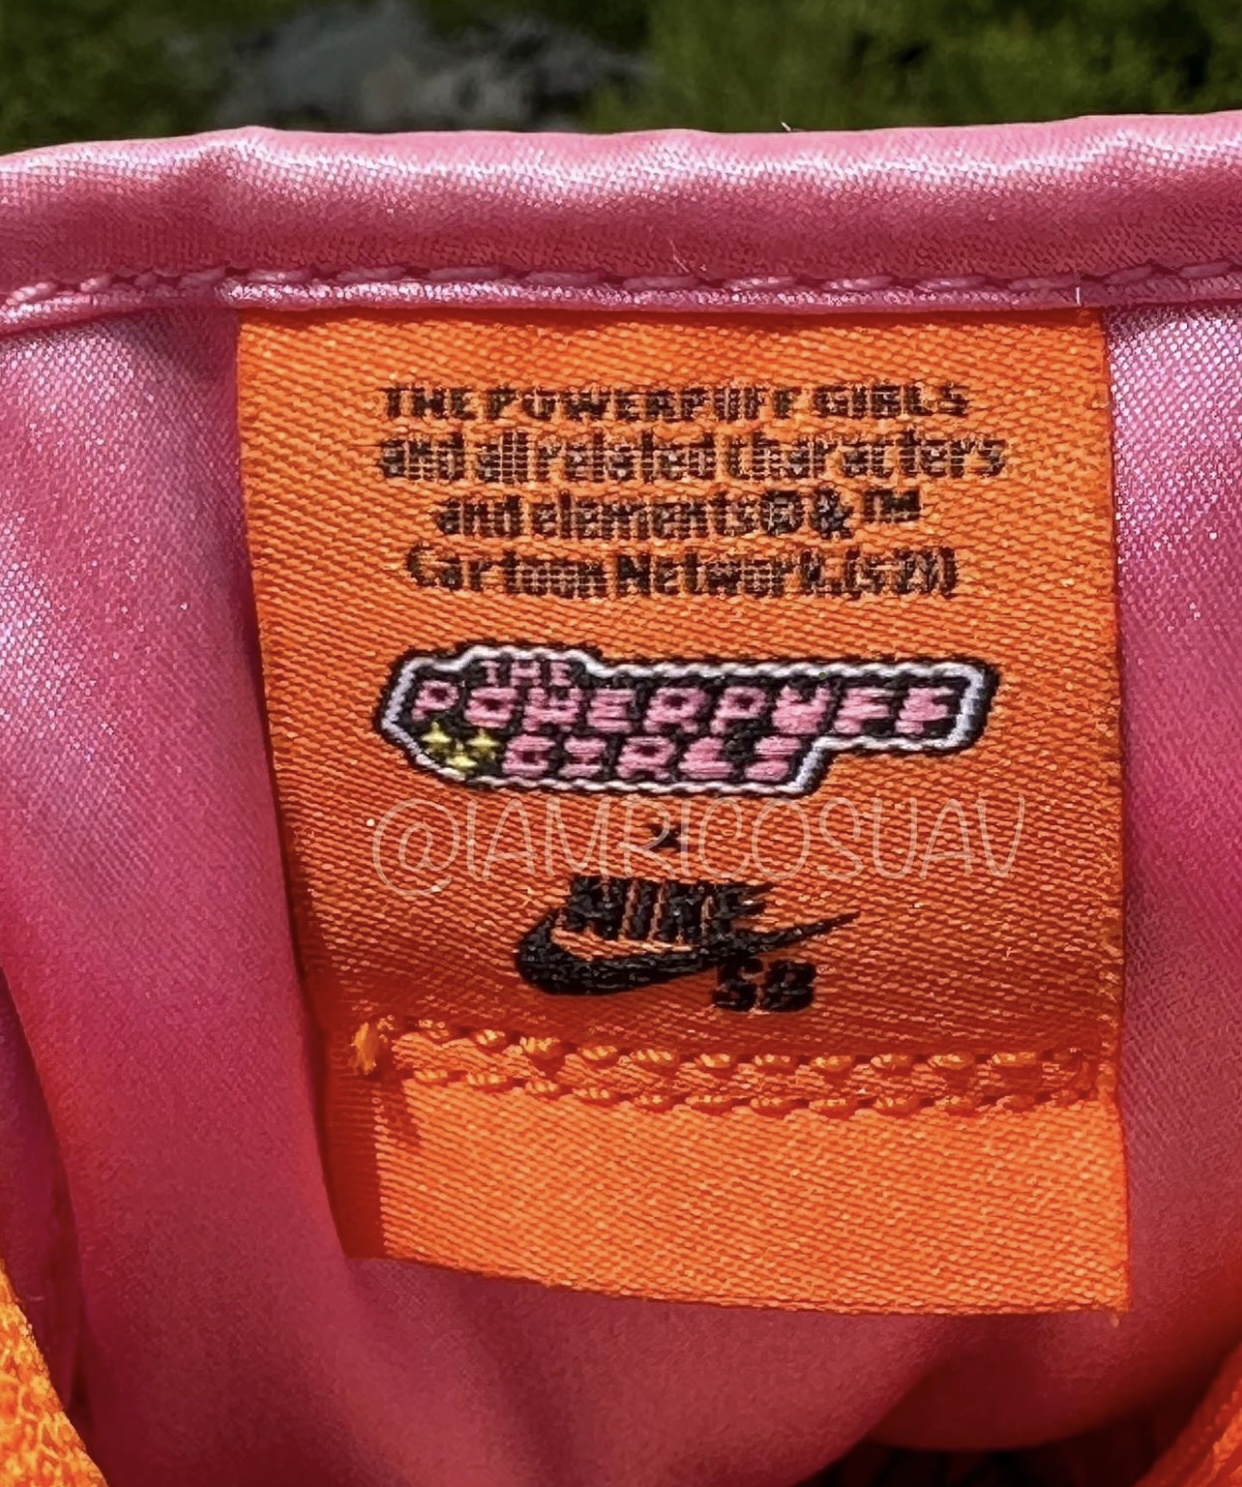 Powerpuff Girls x Back Nike Back nike cortez basic ltr leather vf gs pale ivory inner tongue labels